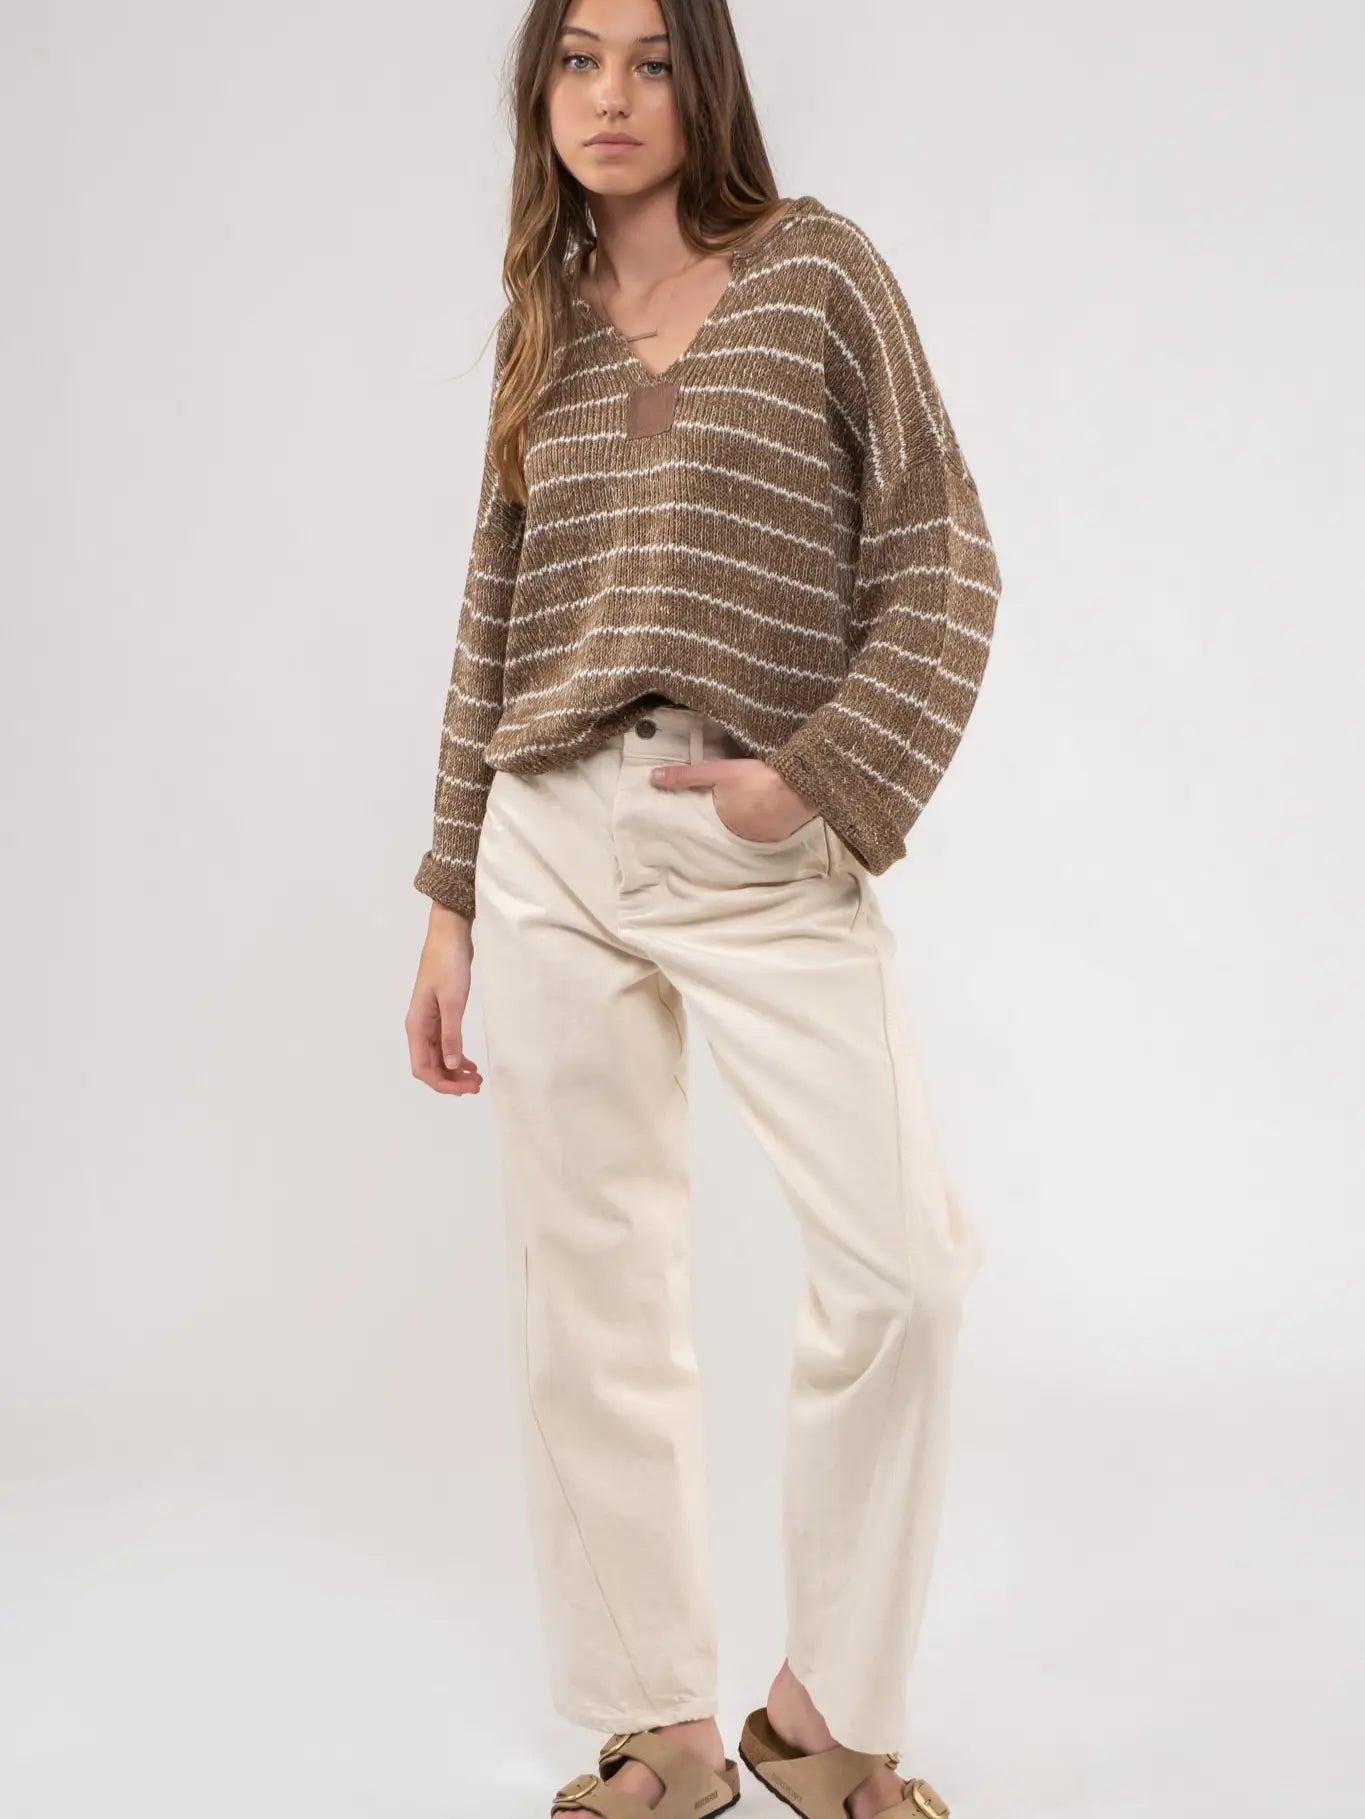 Brown Striped Knit Sweater